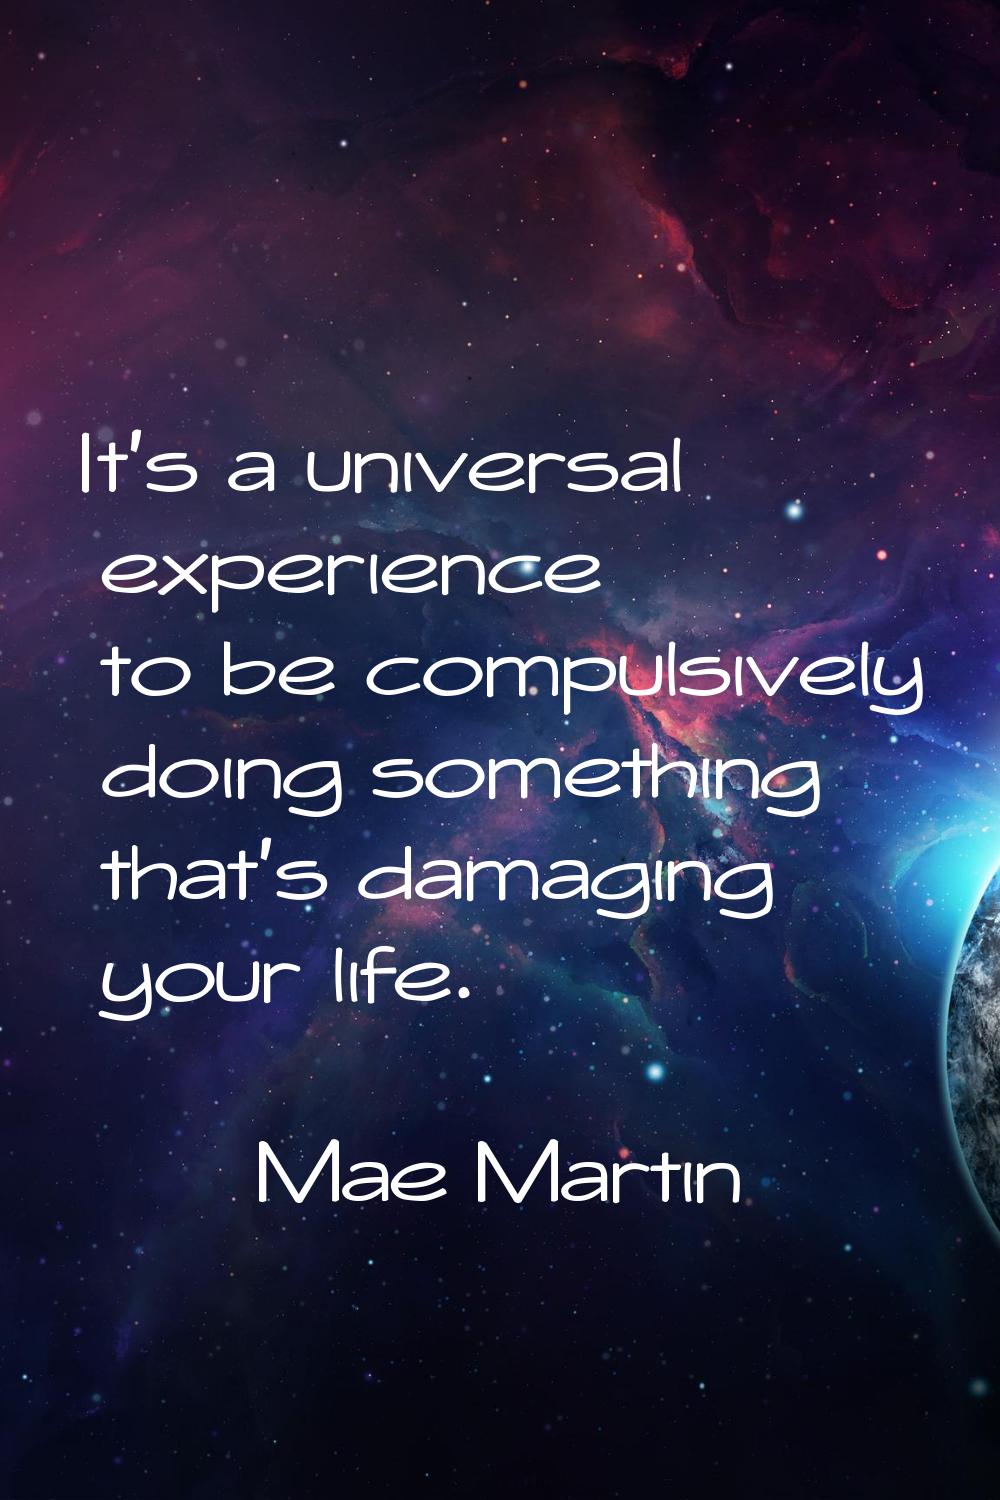 It's a universal experience to be compulsively doing something that's damaging your life.